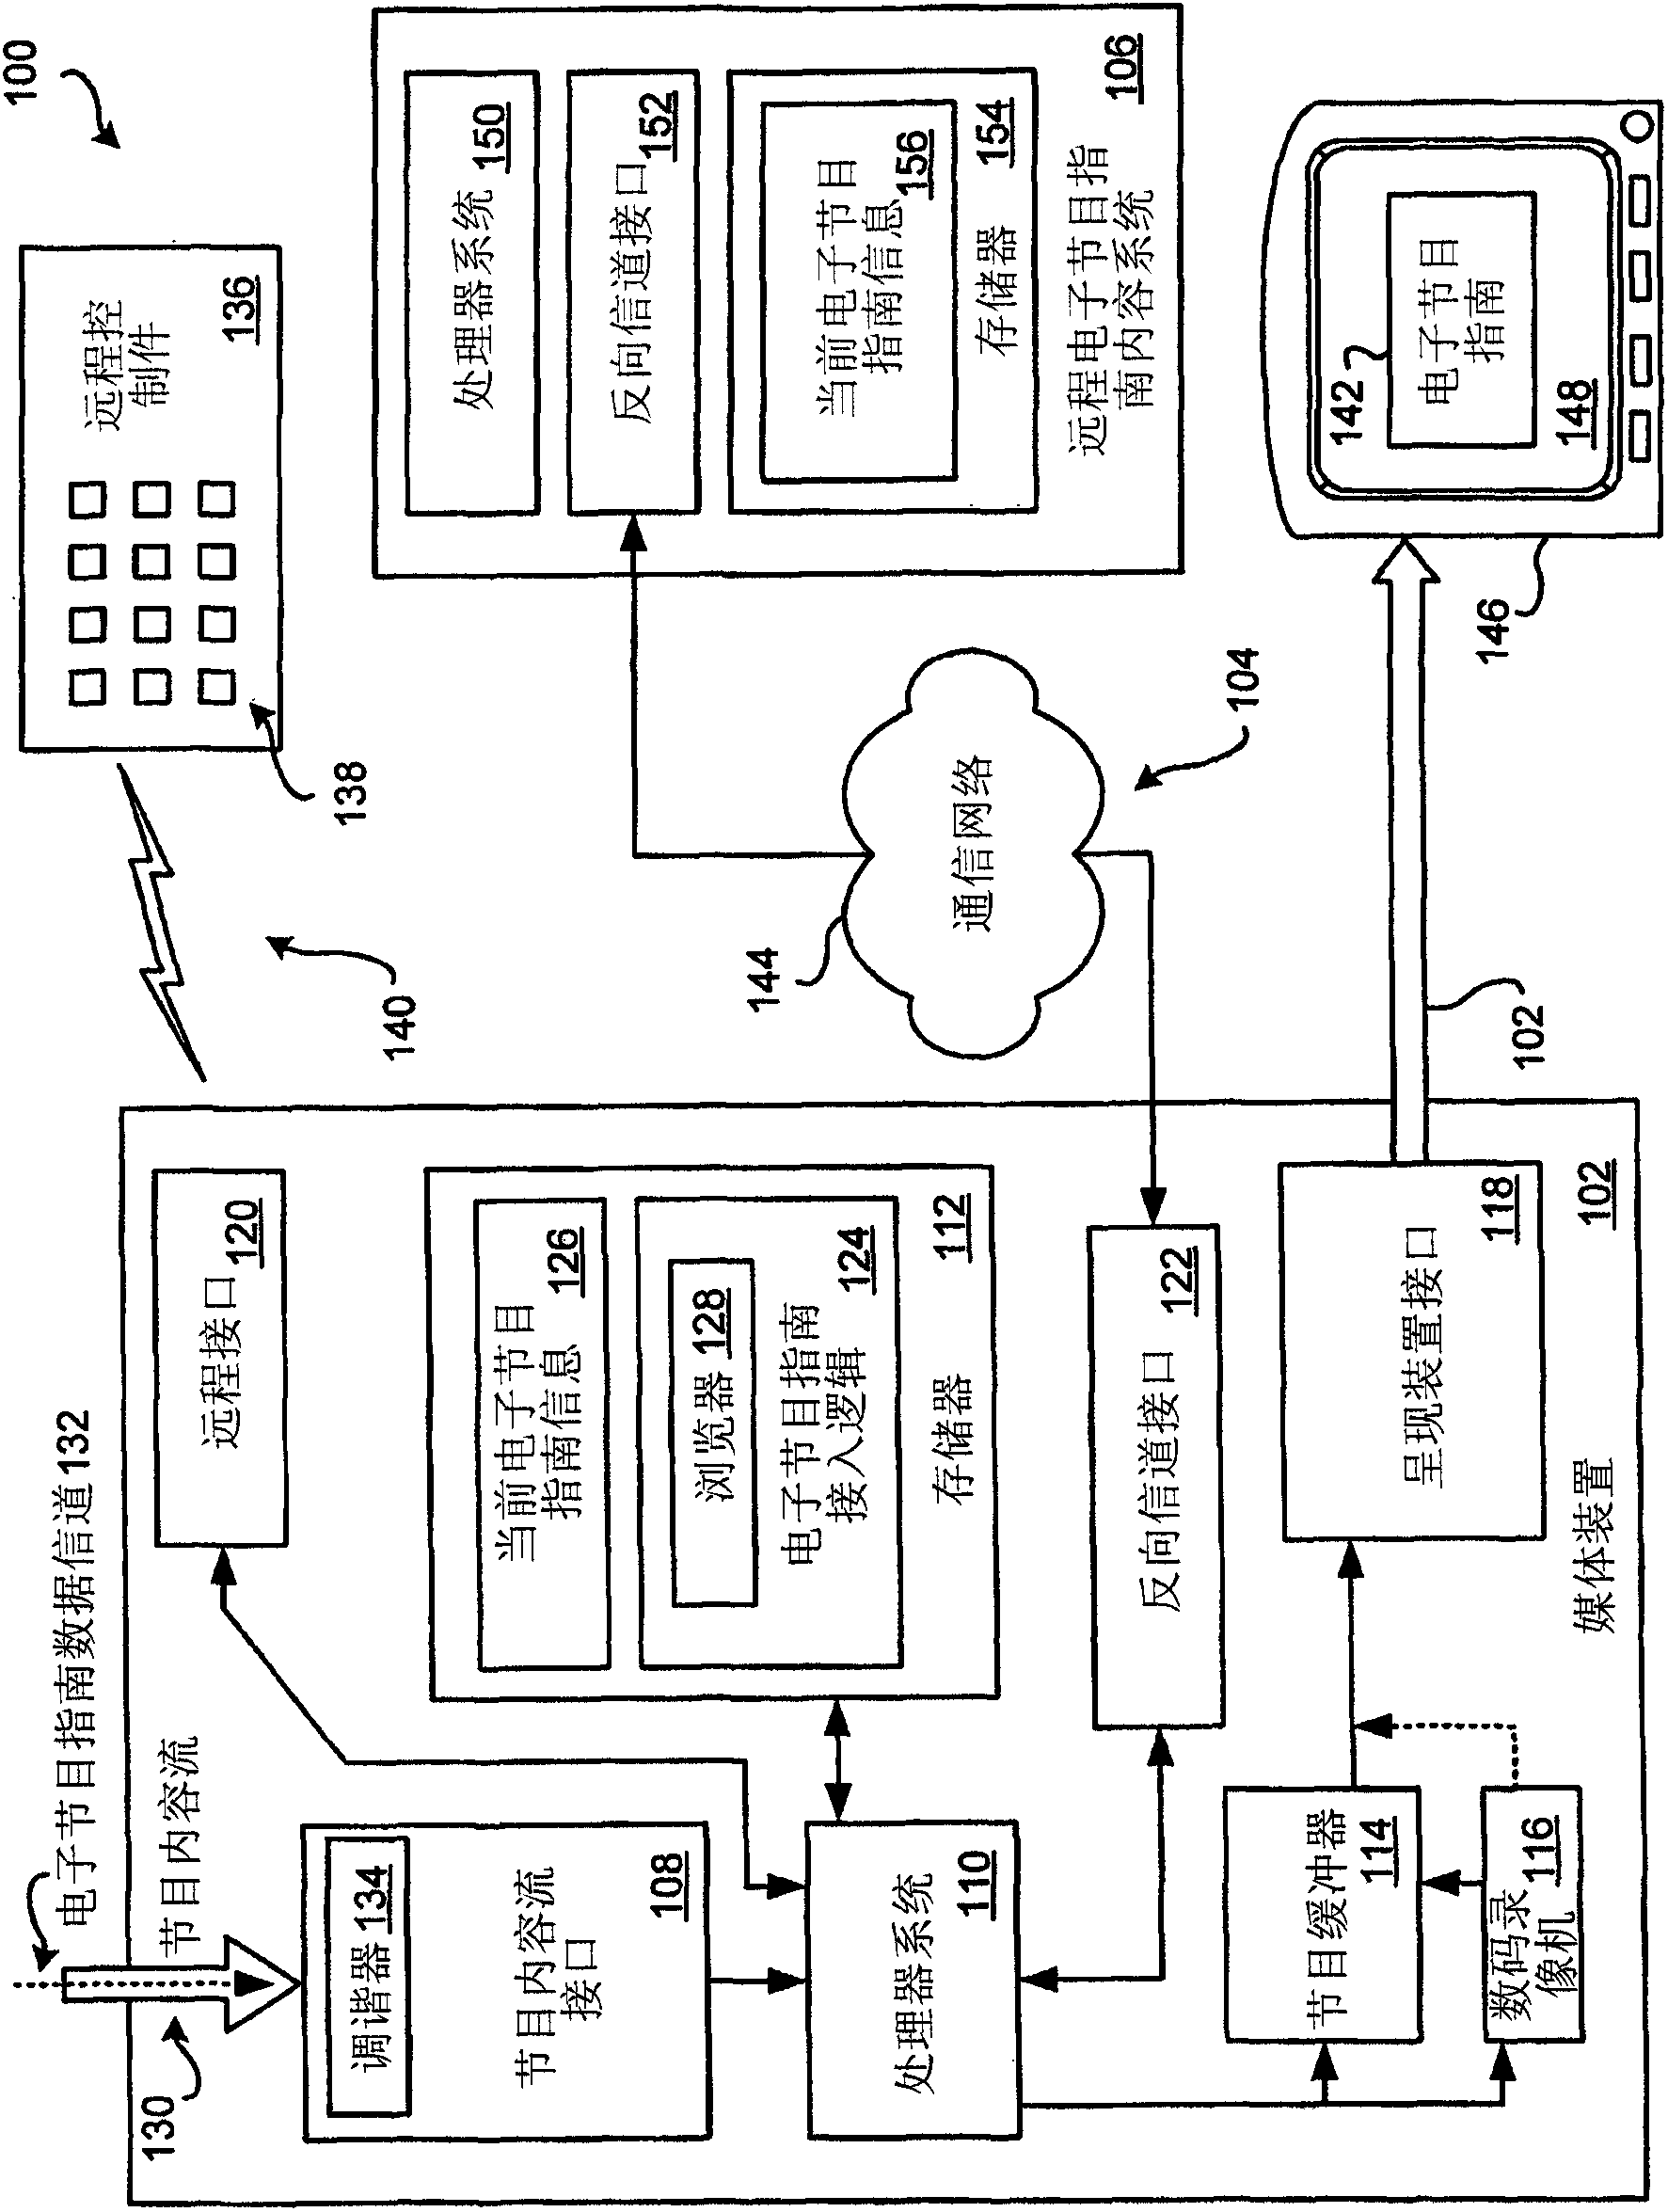 Systems and methods for accessing electronic program guide information over a backchannel communication path